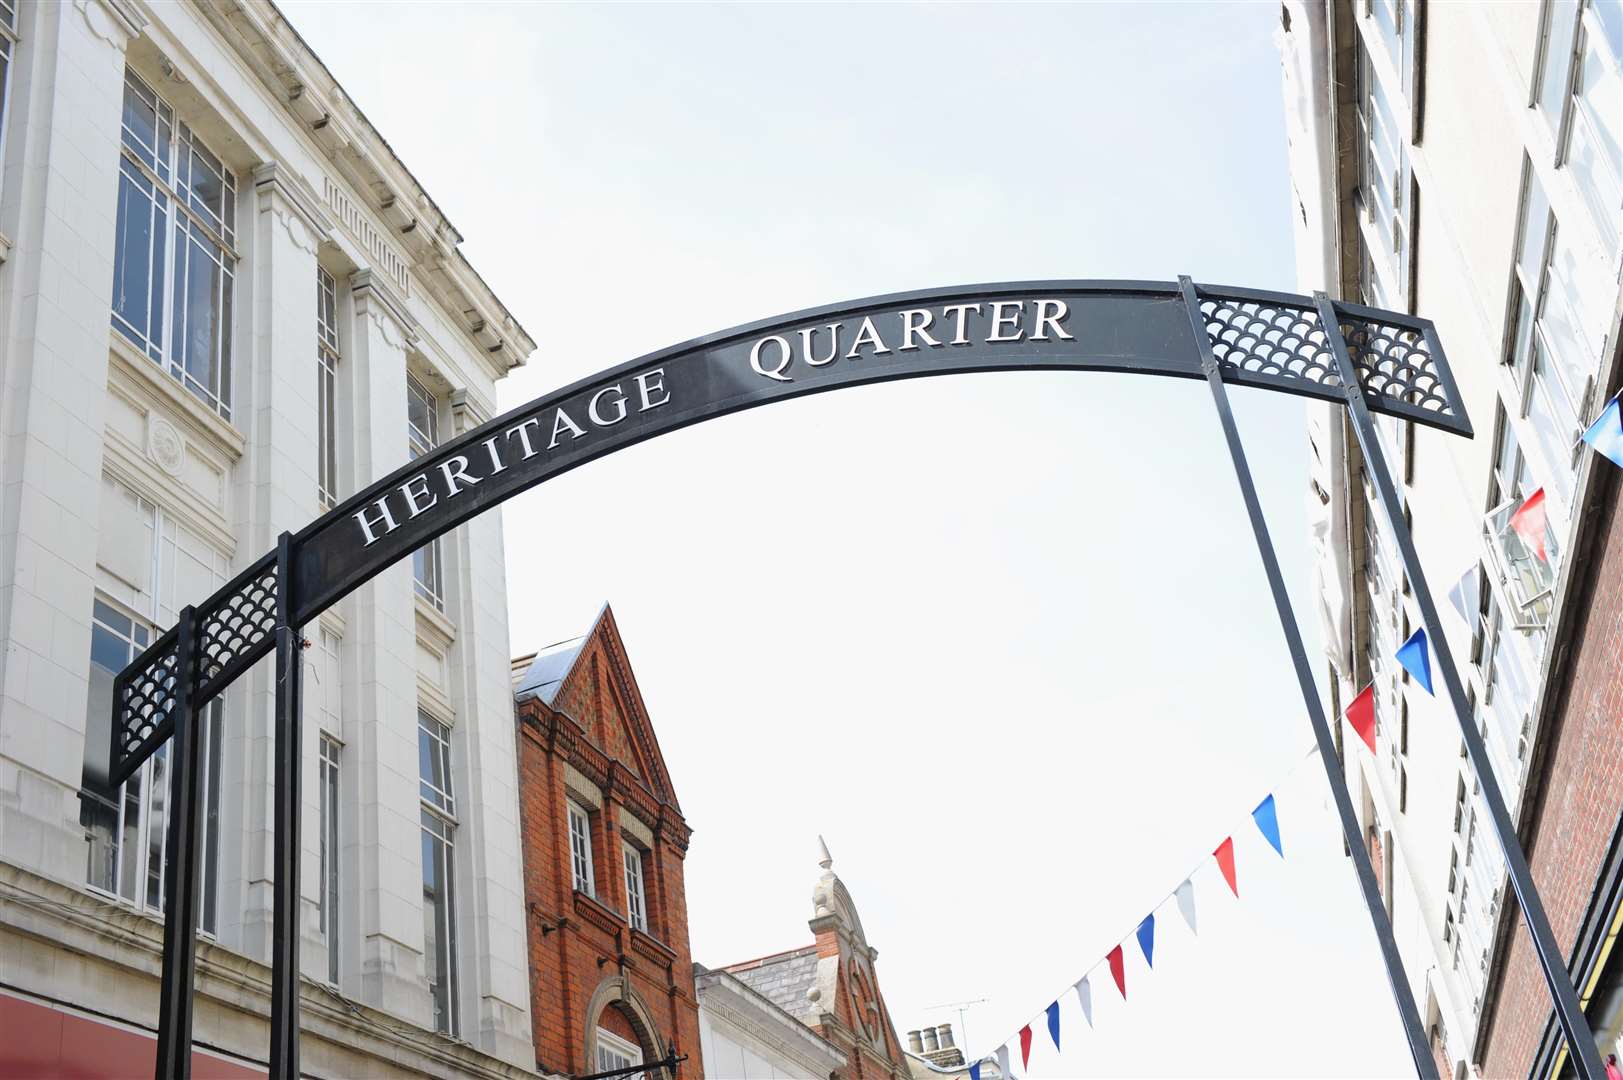 The Heritage Quarter has been earmarked for redevelopment for 15 years